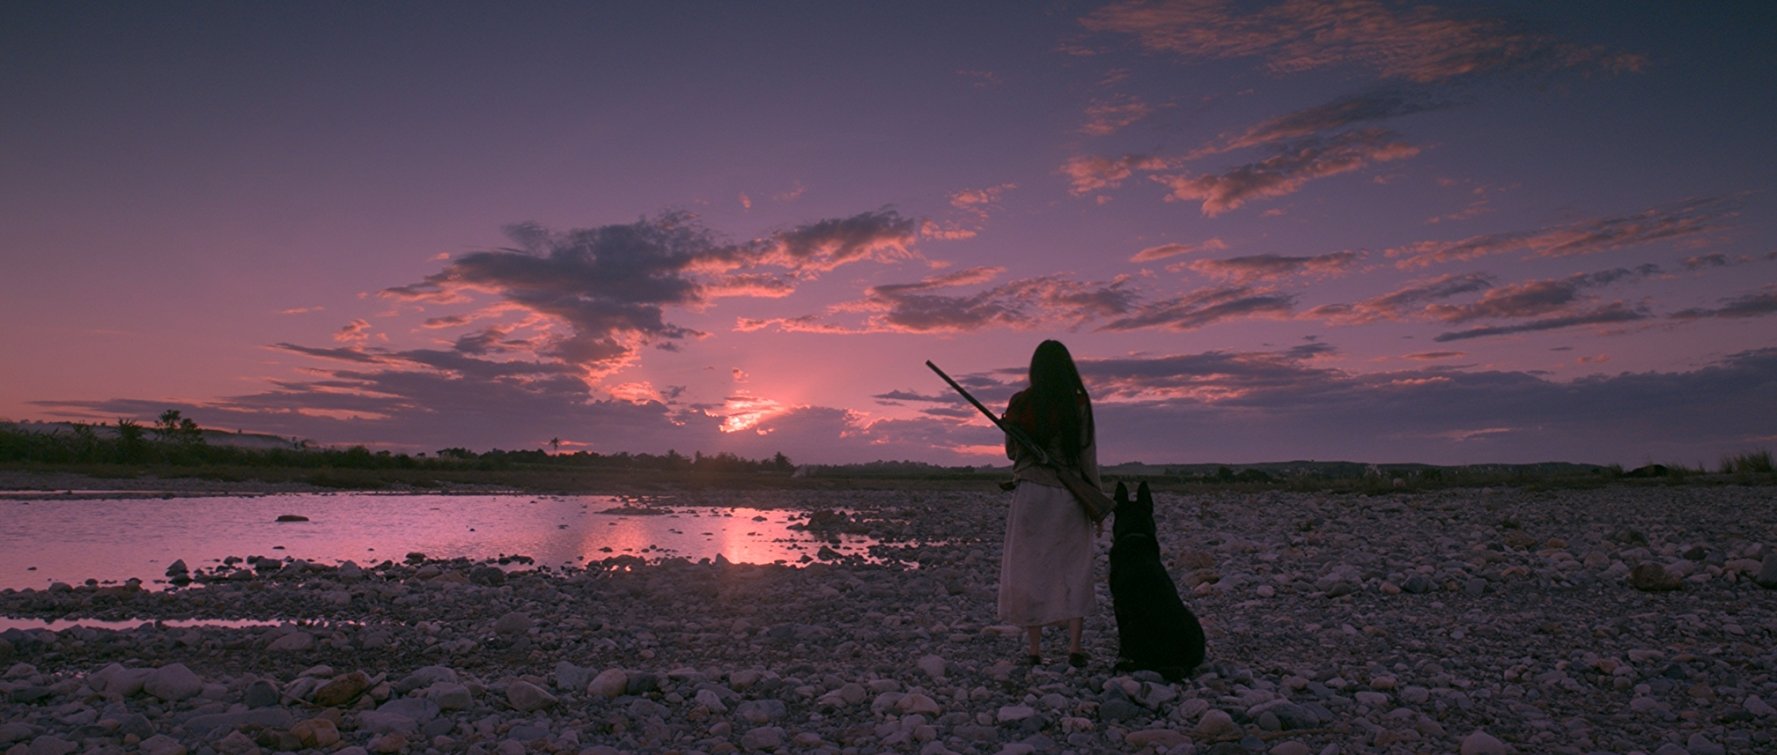 Birdshot: An Allegory of Paradise Lost